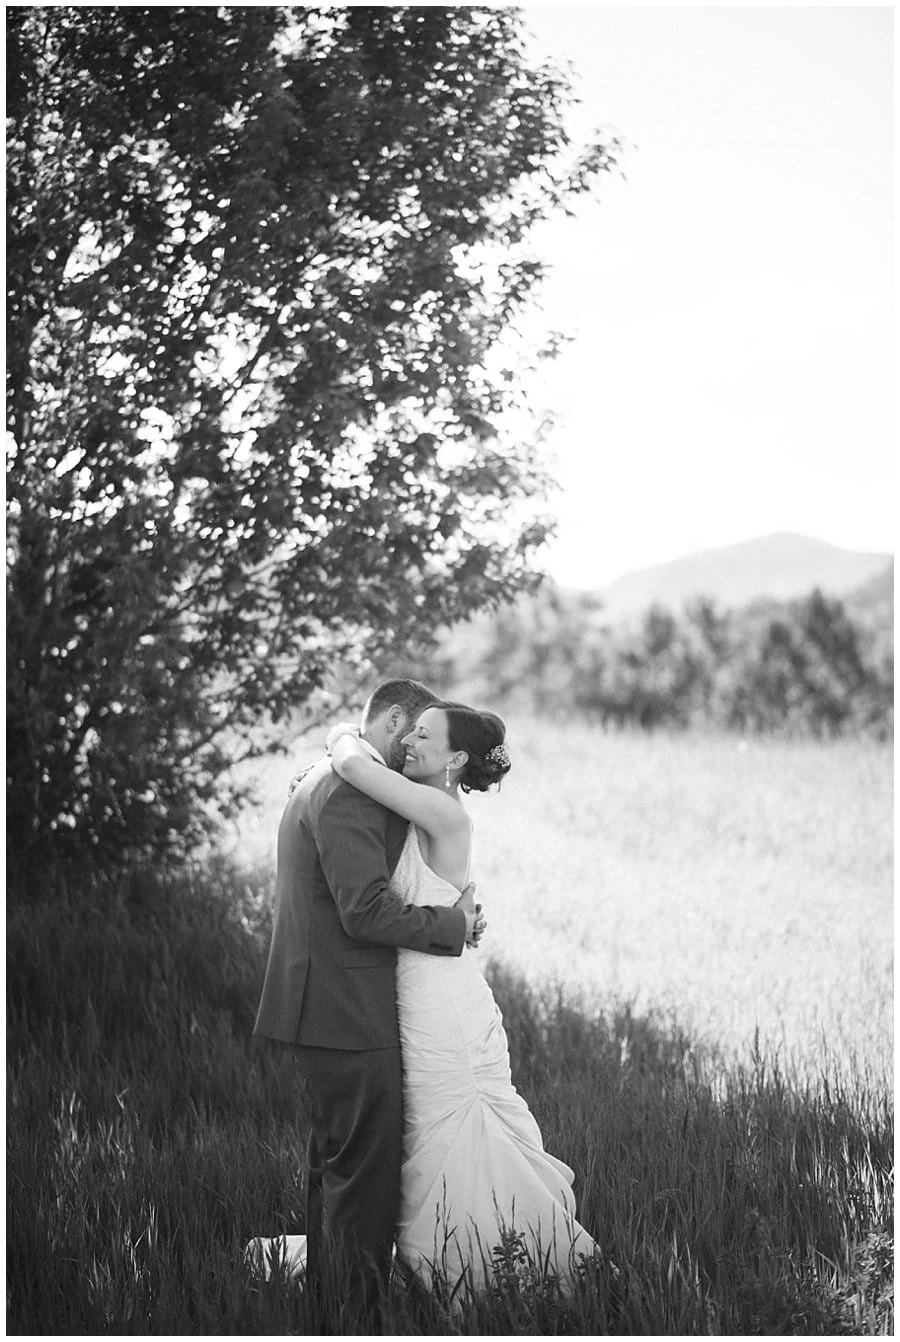 bride and groom embrace in field on wedding day at spring Denver Botanic Gardens at Chatfield Wedding by Denver Botanic Gardens wedding photographer Jennie Crate